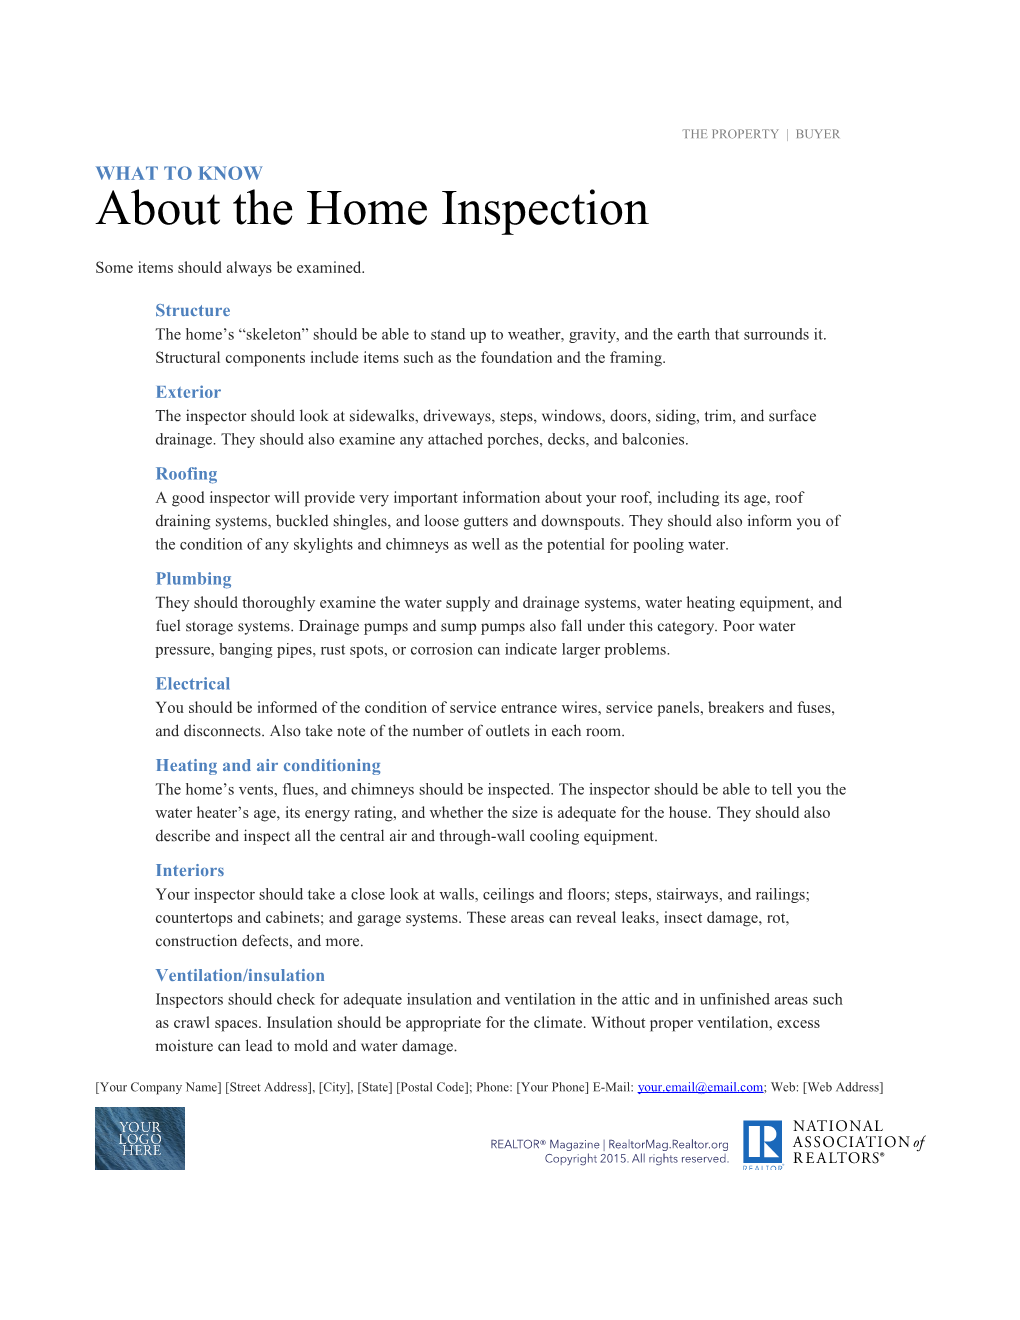 About the Home Inspection